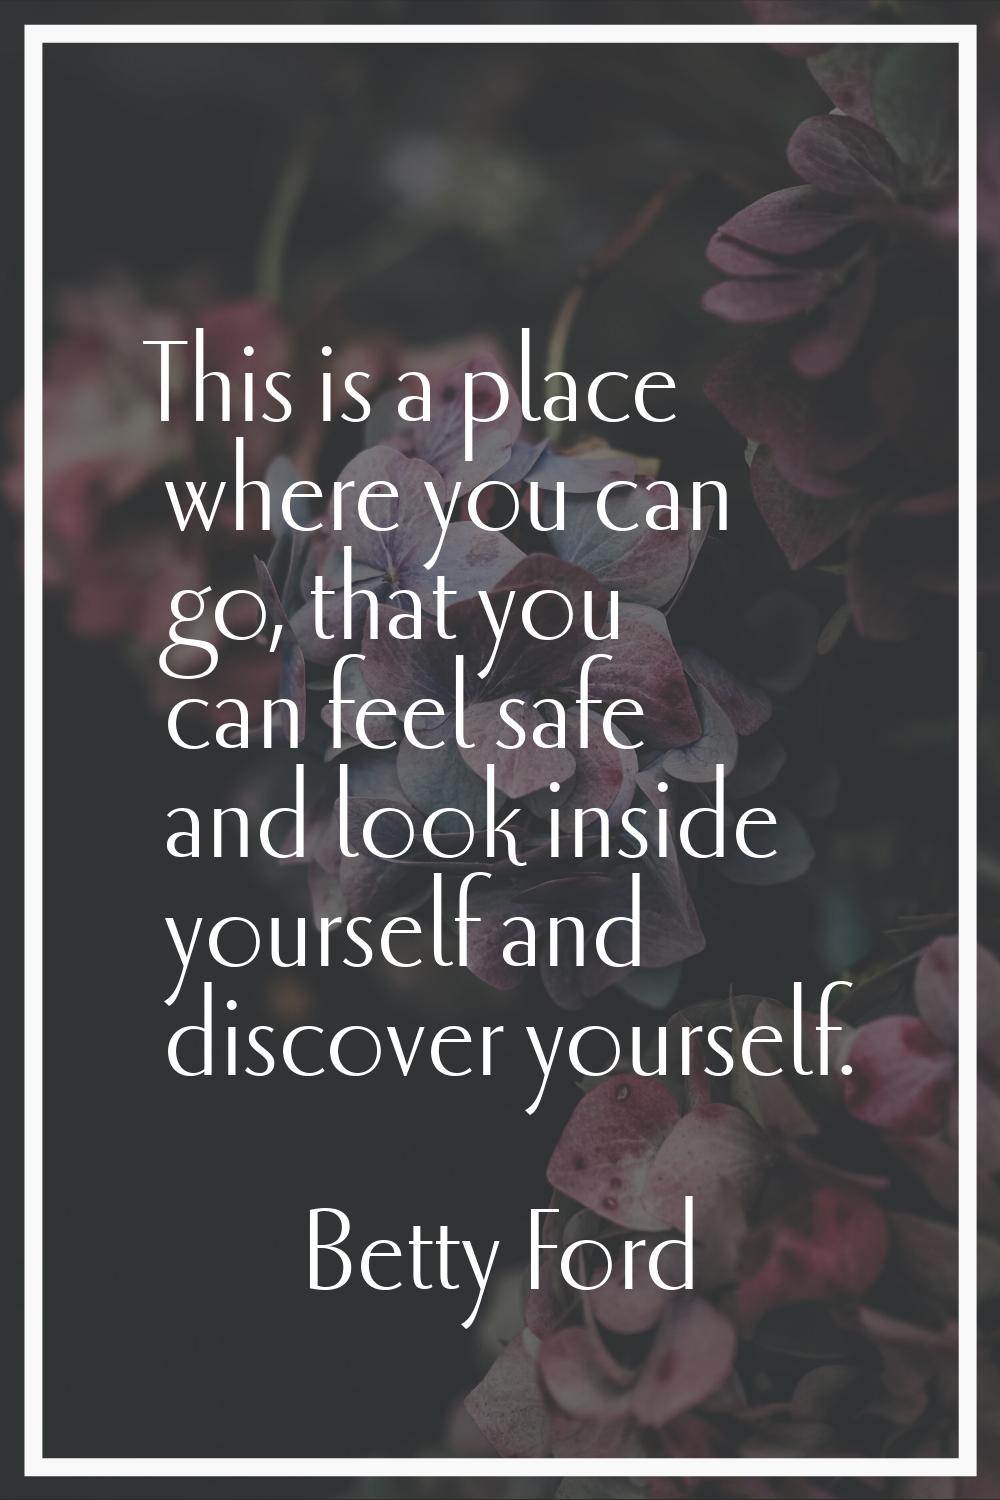 This is a place where you can go, that you can feel safe and look inside yourself and discover your